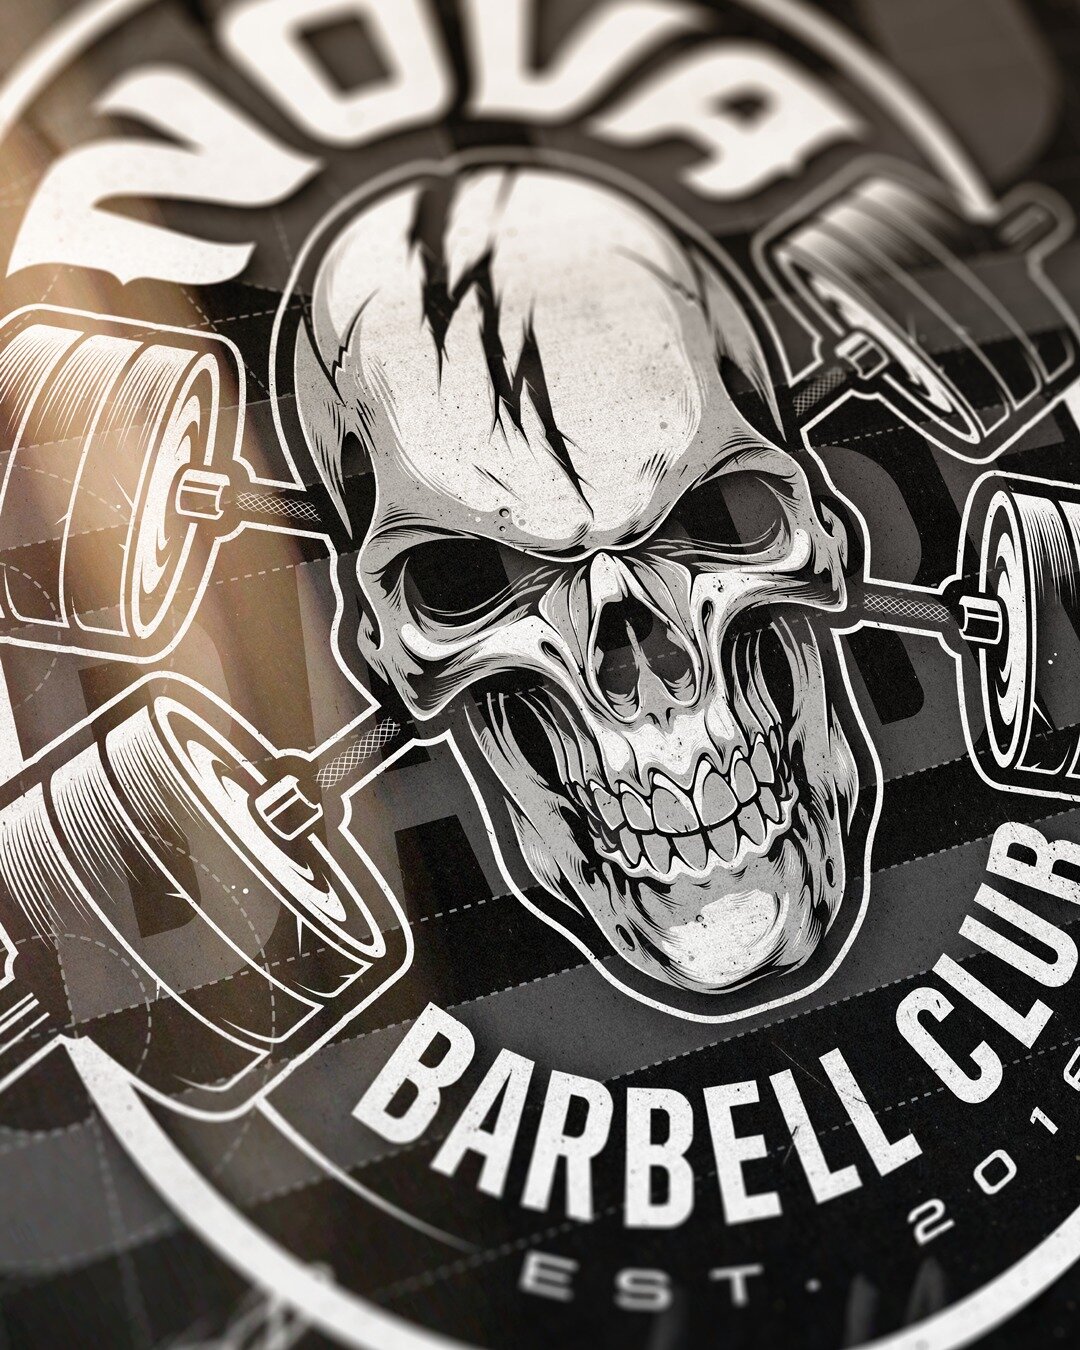 Custom Lettering and Vector Illustration for @nova.barbell.club 

www.Absorb81.com
Craig@Absorb81.com

#Barbell #Fitness #Weightlifting #Exercise #Gym #Gymlife #Crossfit #Lifting #Absorb81 #Design #Branding #Brandidentity #Skull